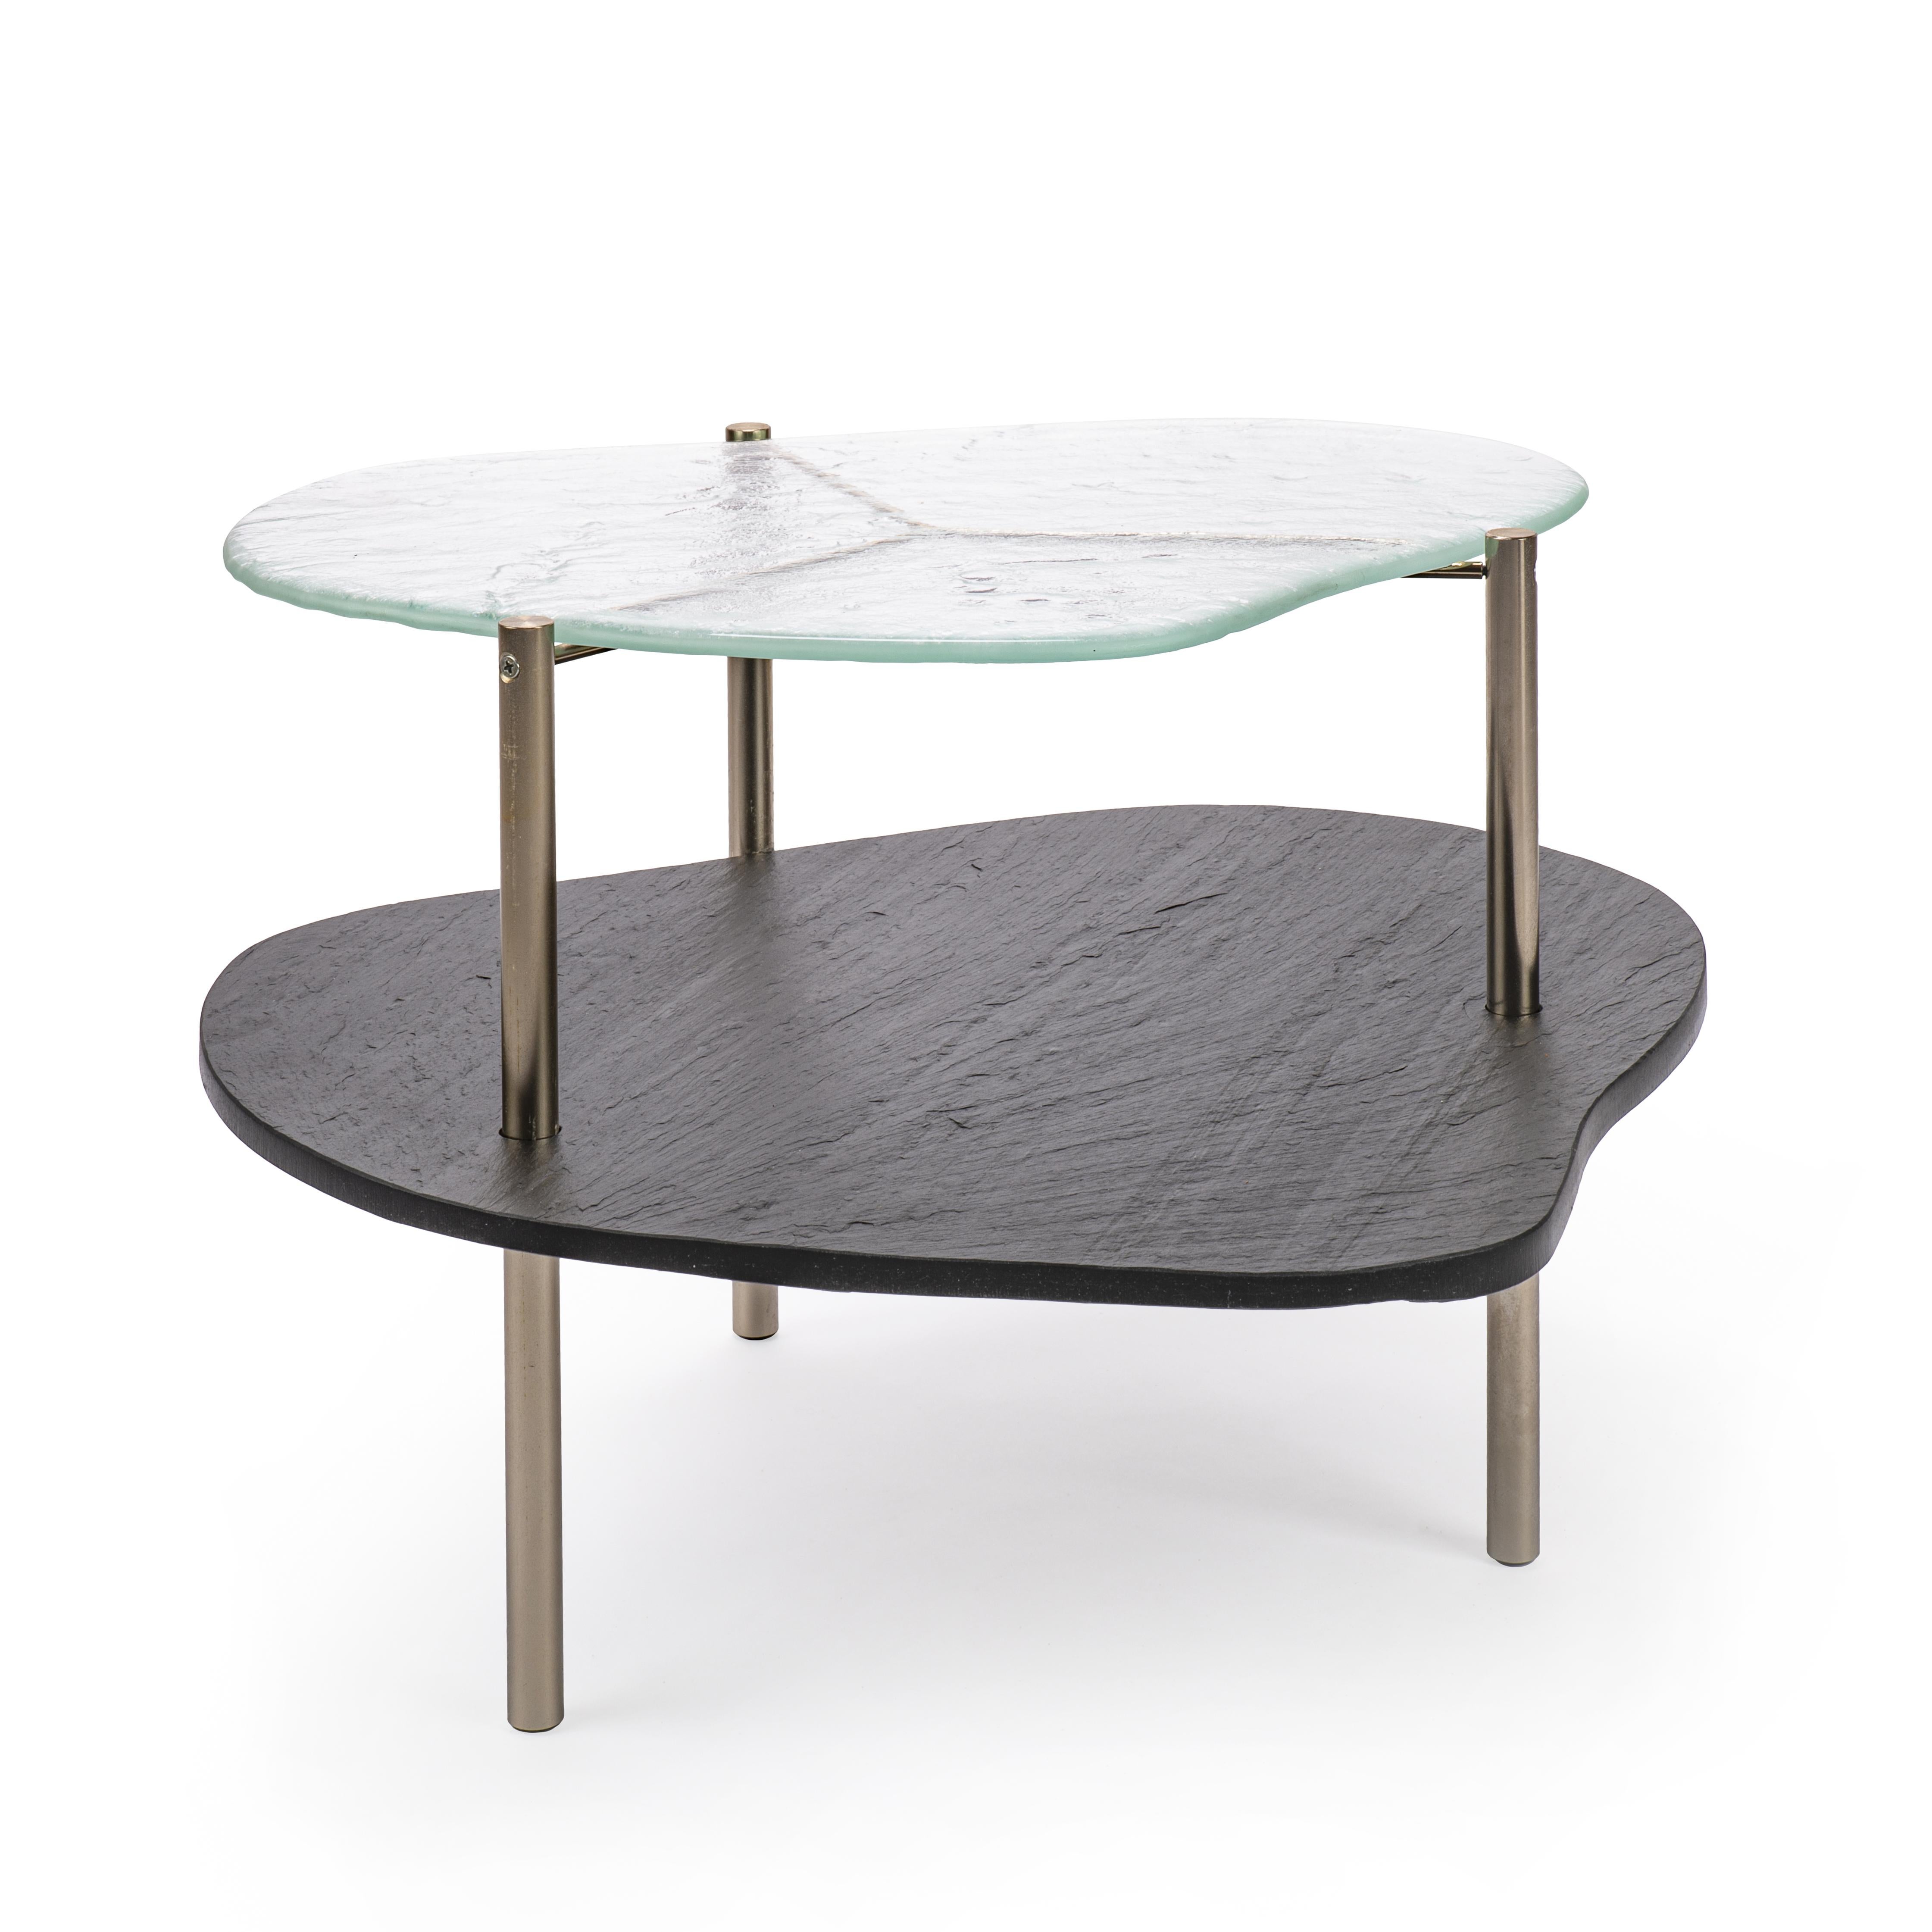 Table No.3 by Anežka Závadová
Materials: Polished slate stone and steel skeleton in satin brass finish
Dimensions: 49.4 x 48.2 x 34.9 cm

Anezka Zavadova has been with Preciosa Lighting since 2016. As a senior designer in the company’s Middle